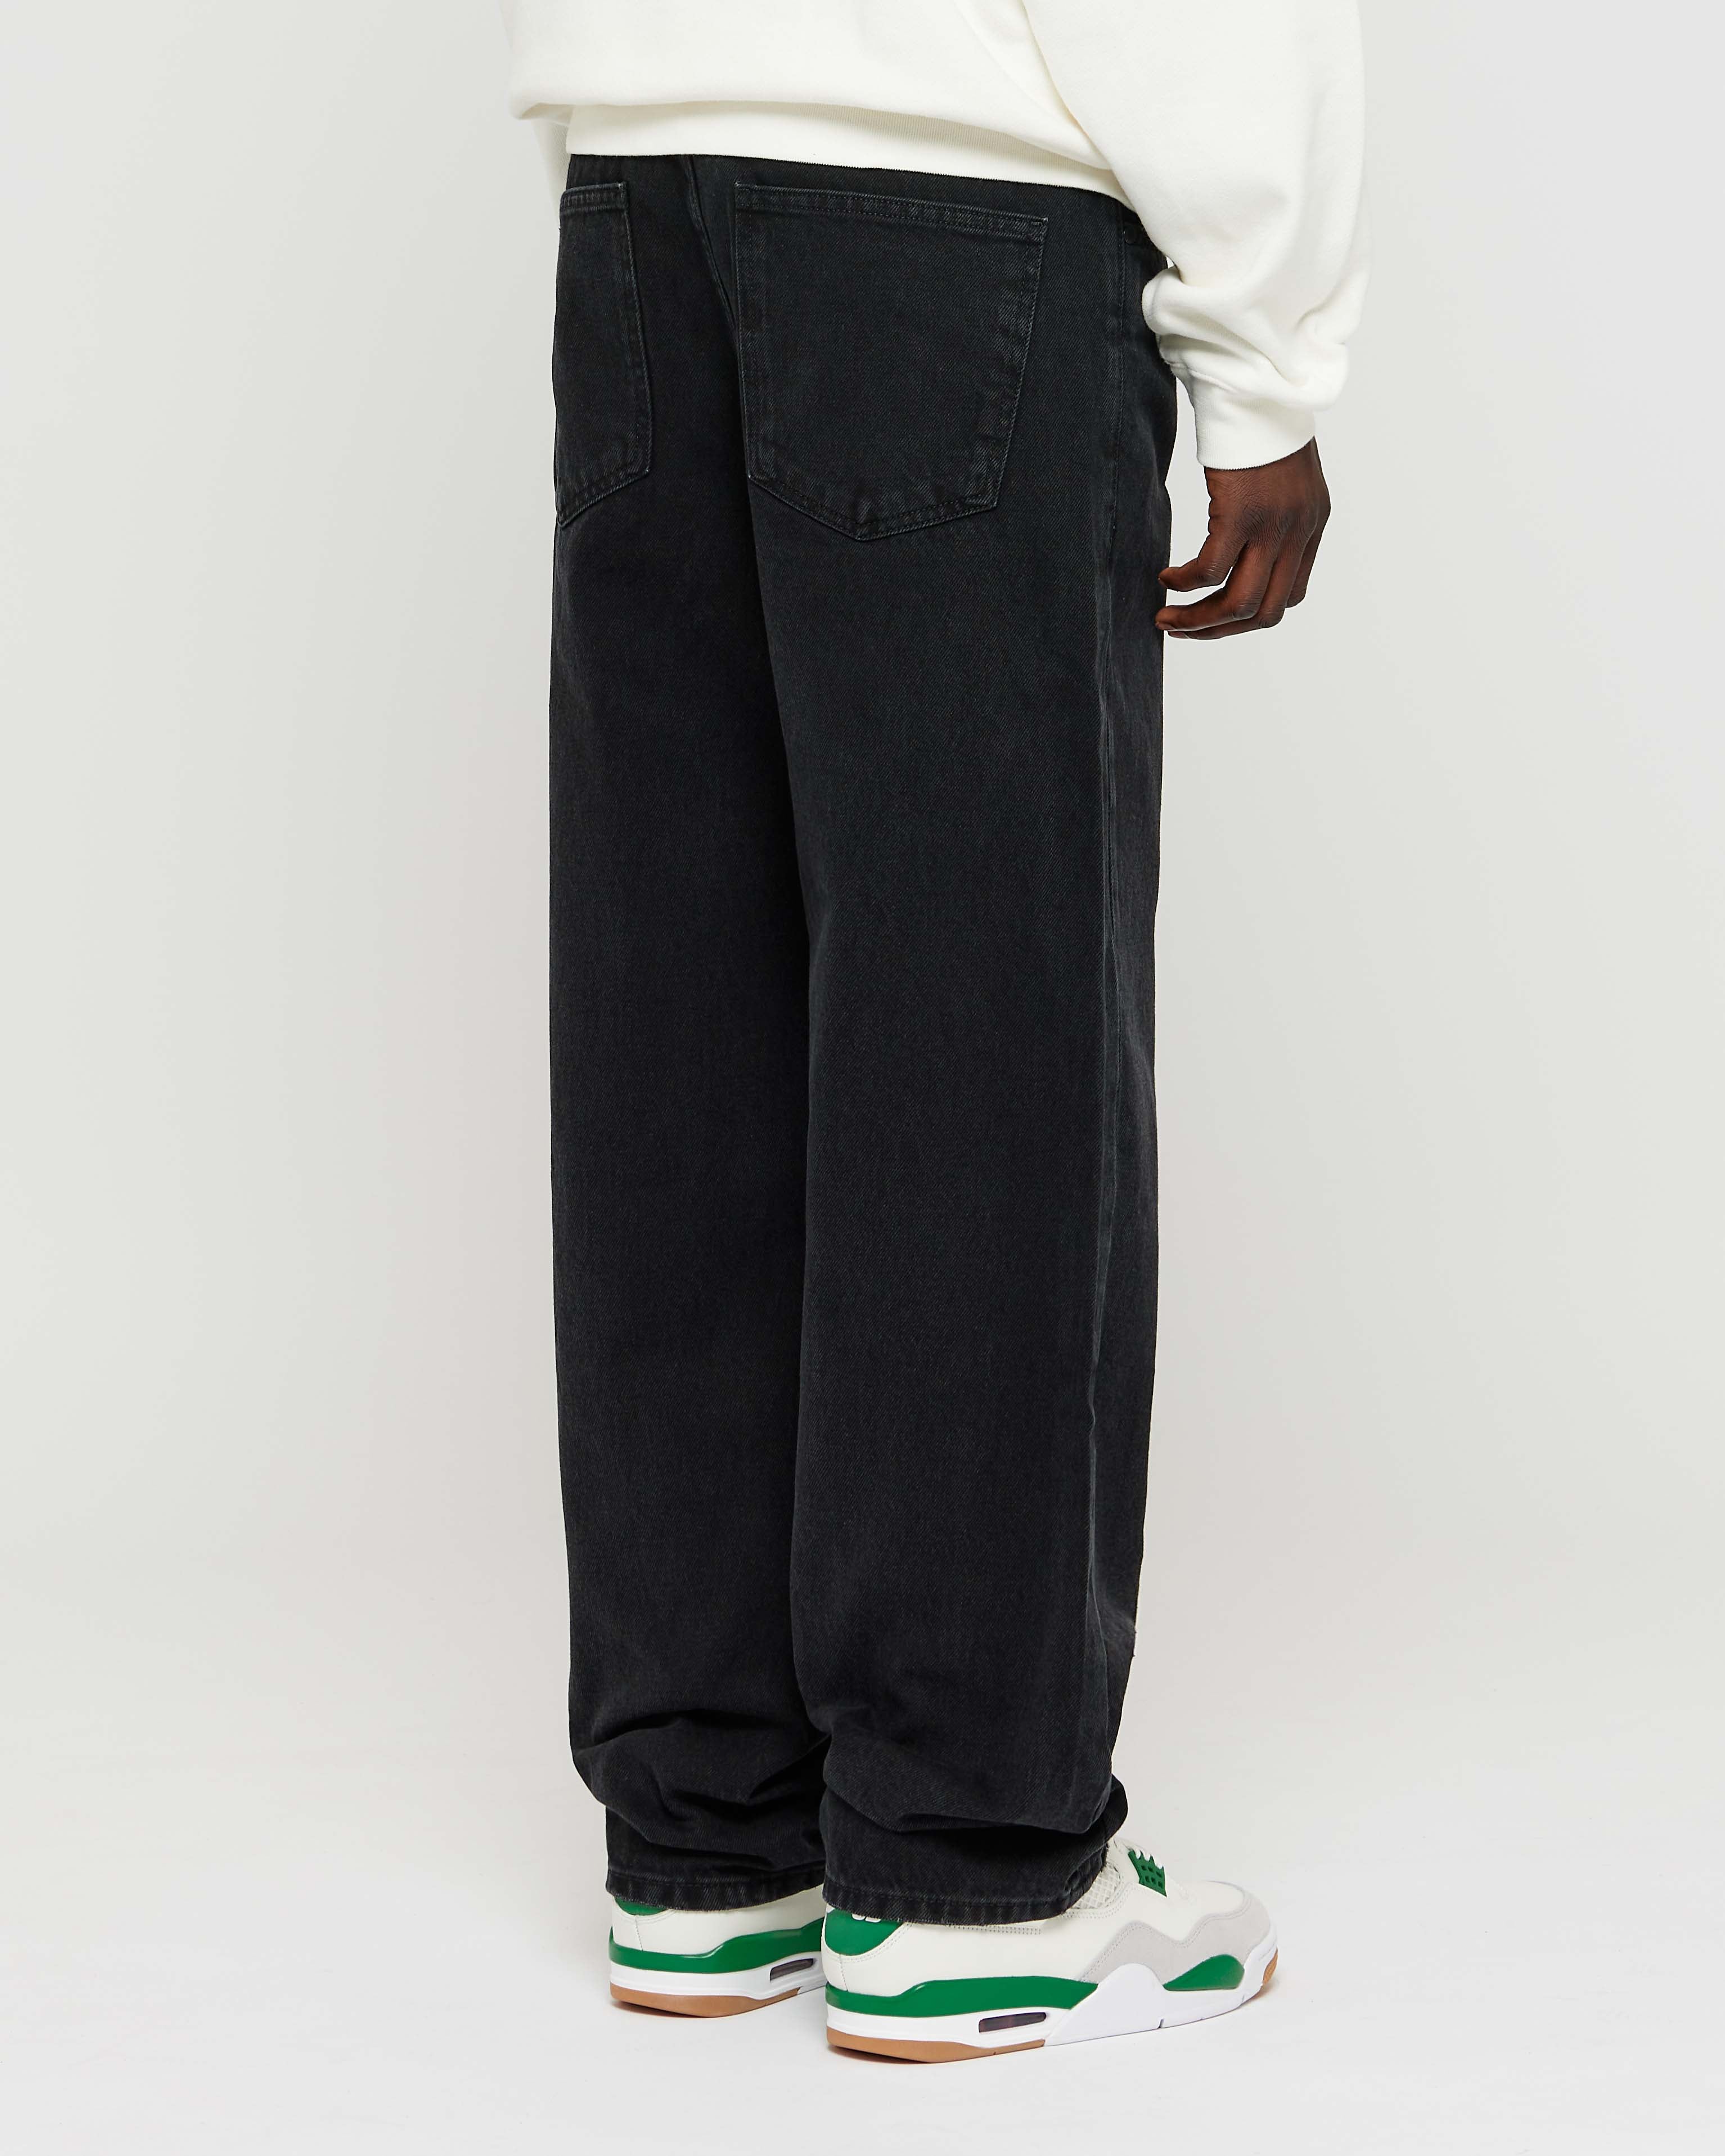 Baggy Basic Jeans – eightyfiveclo